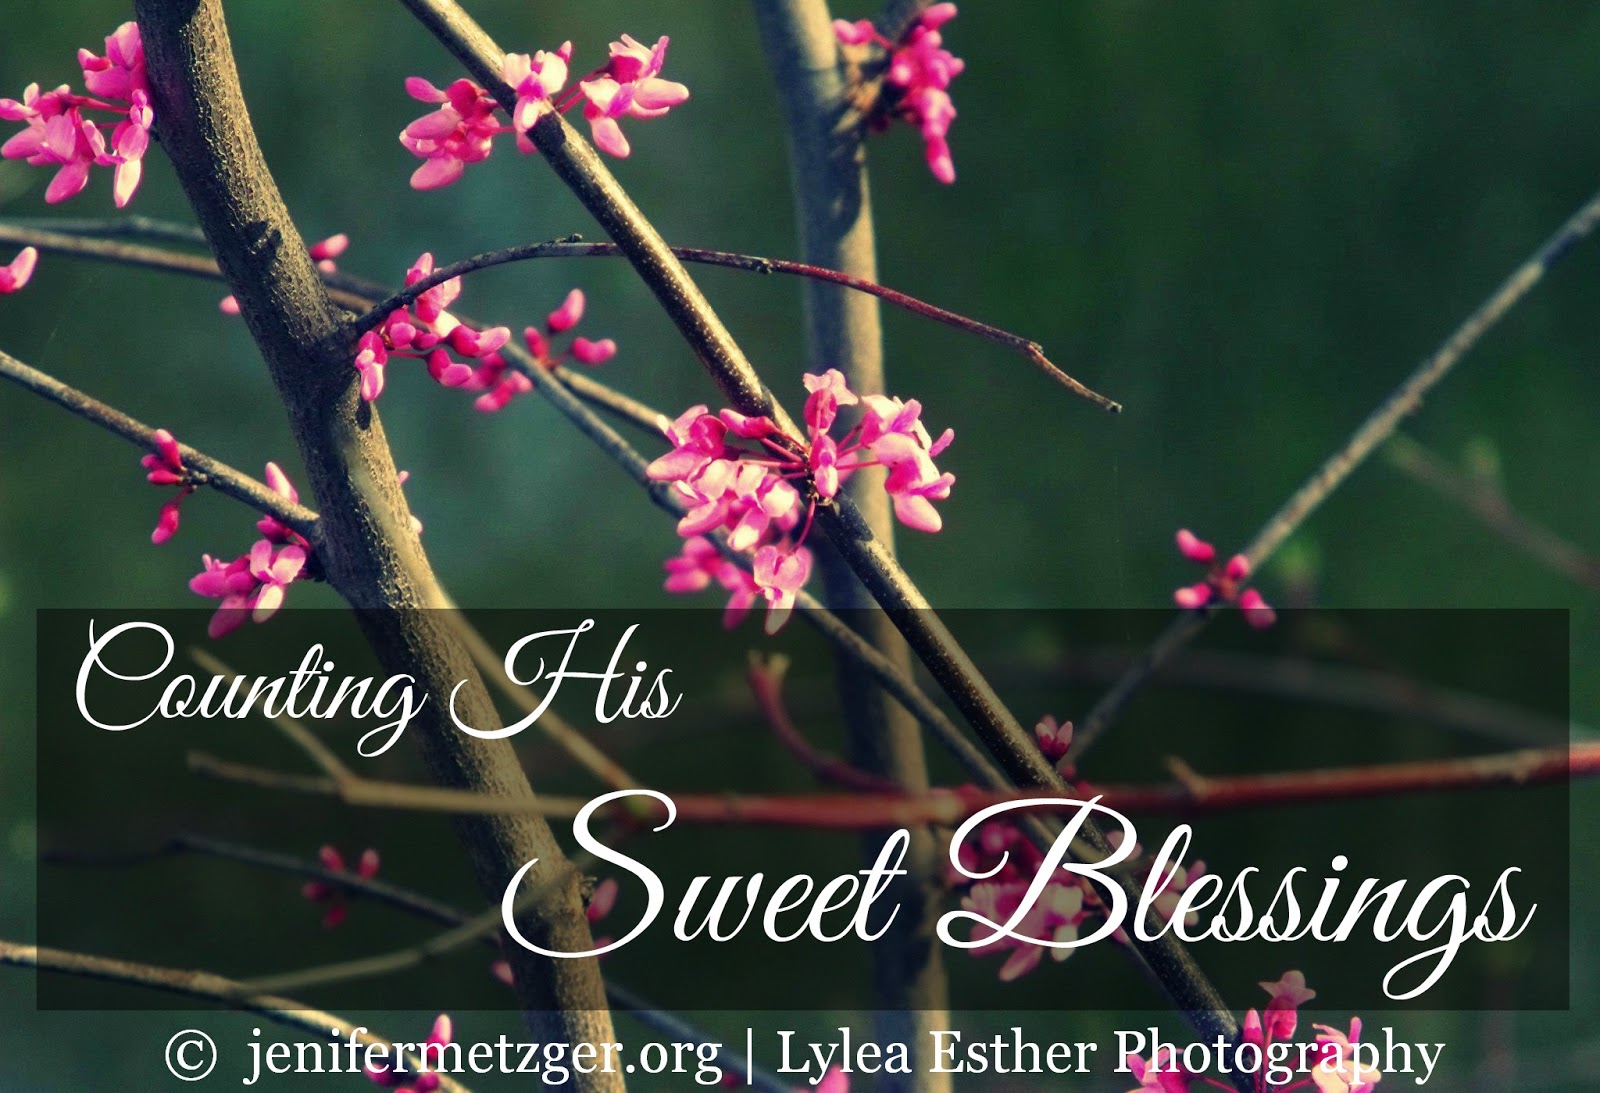 Counting His Sweet #Blessings #thanksgiving #gratefulness